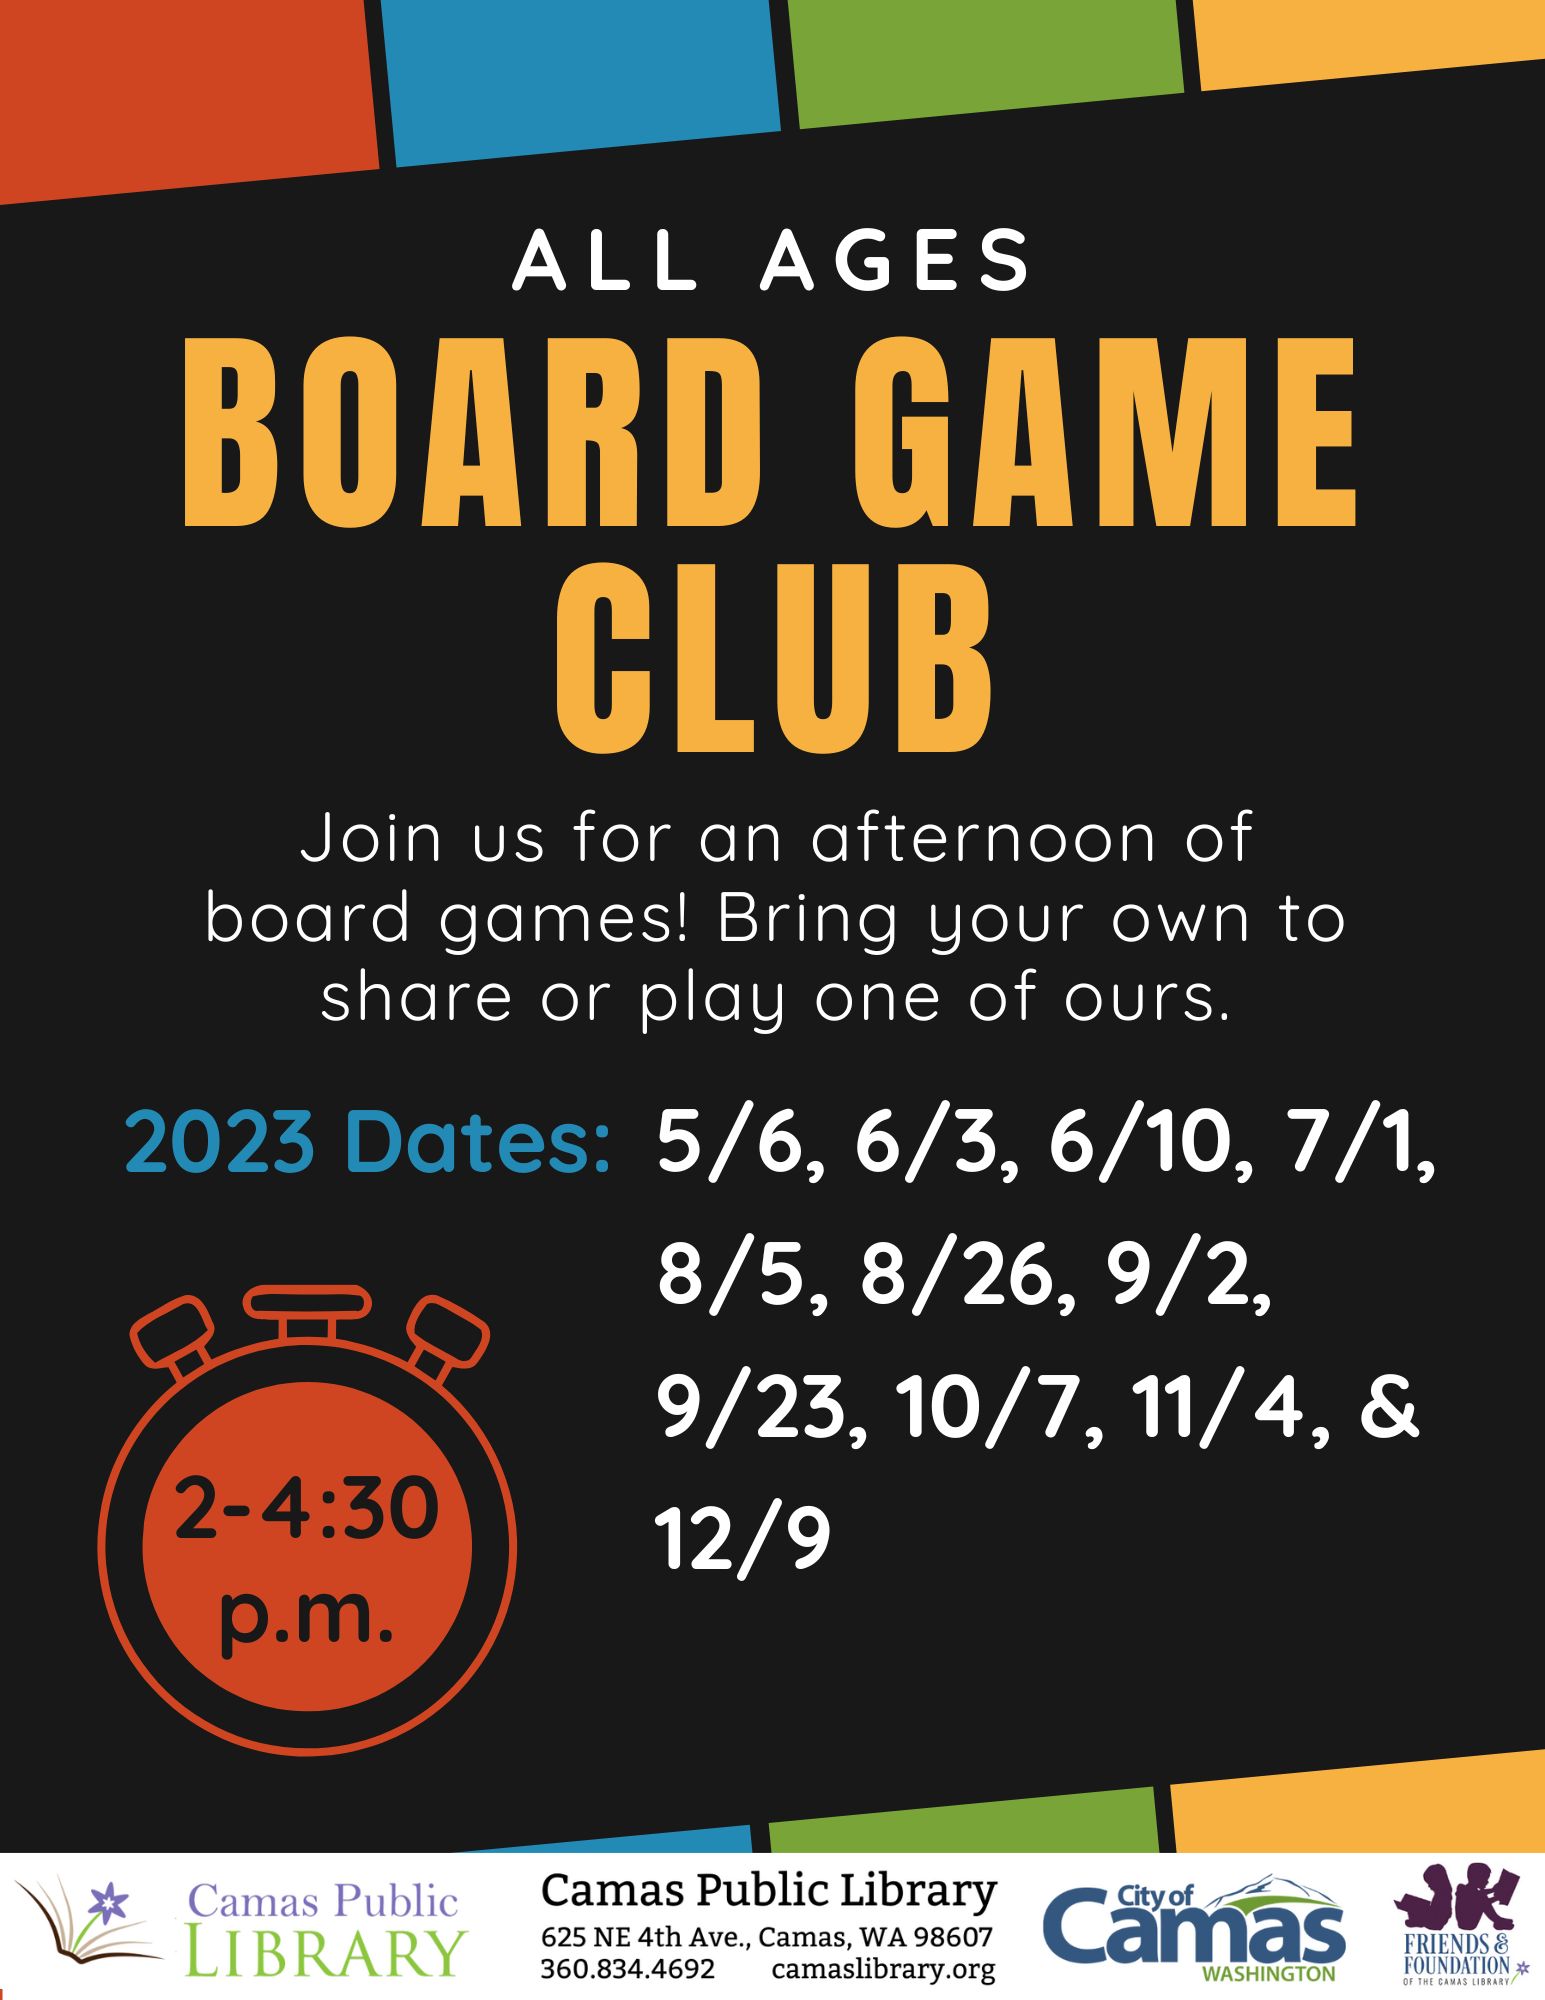 Board Game Club Events